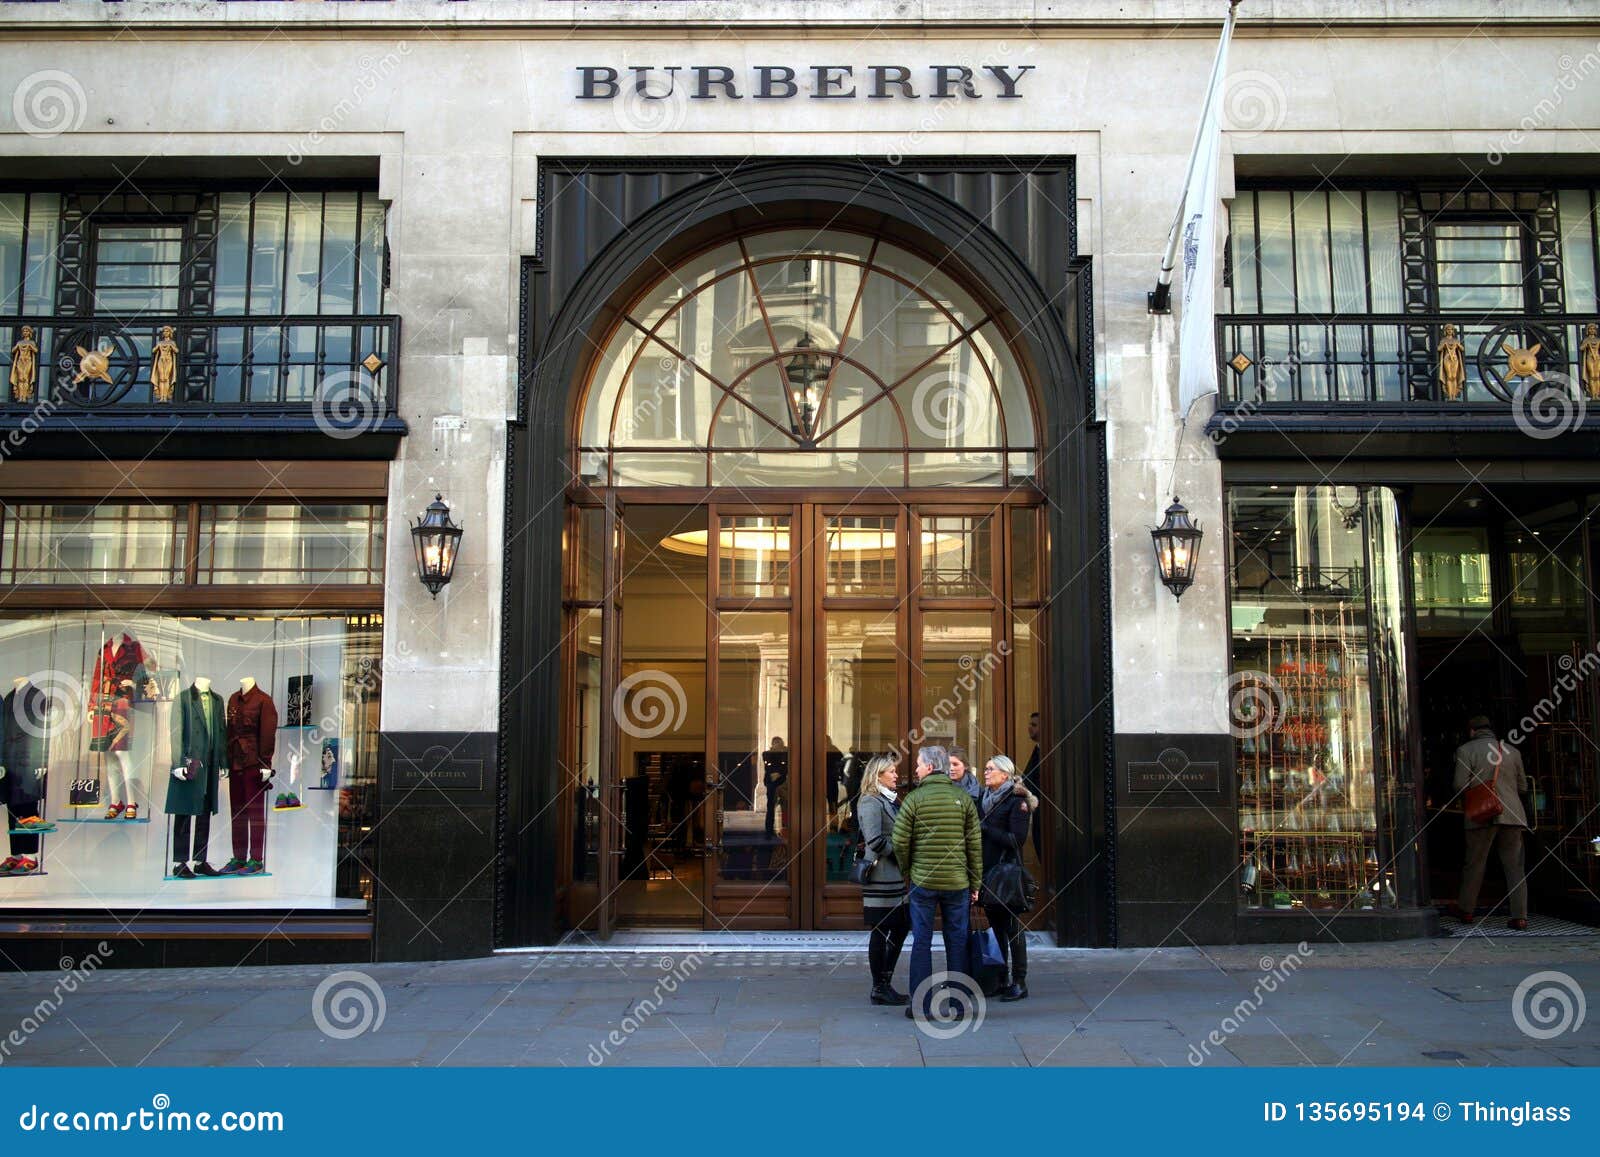 Burberry Clothing Store in London Editorial Stock Image - Image of burberry,  britain: 135695194